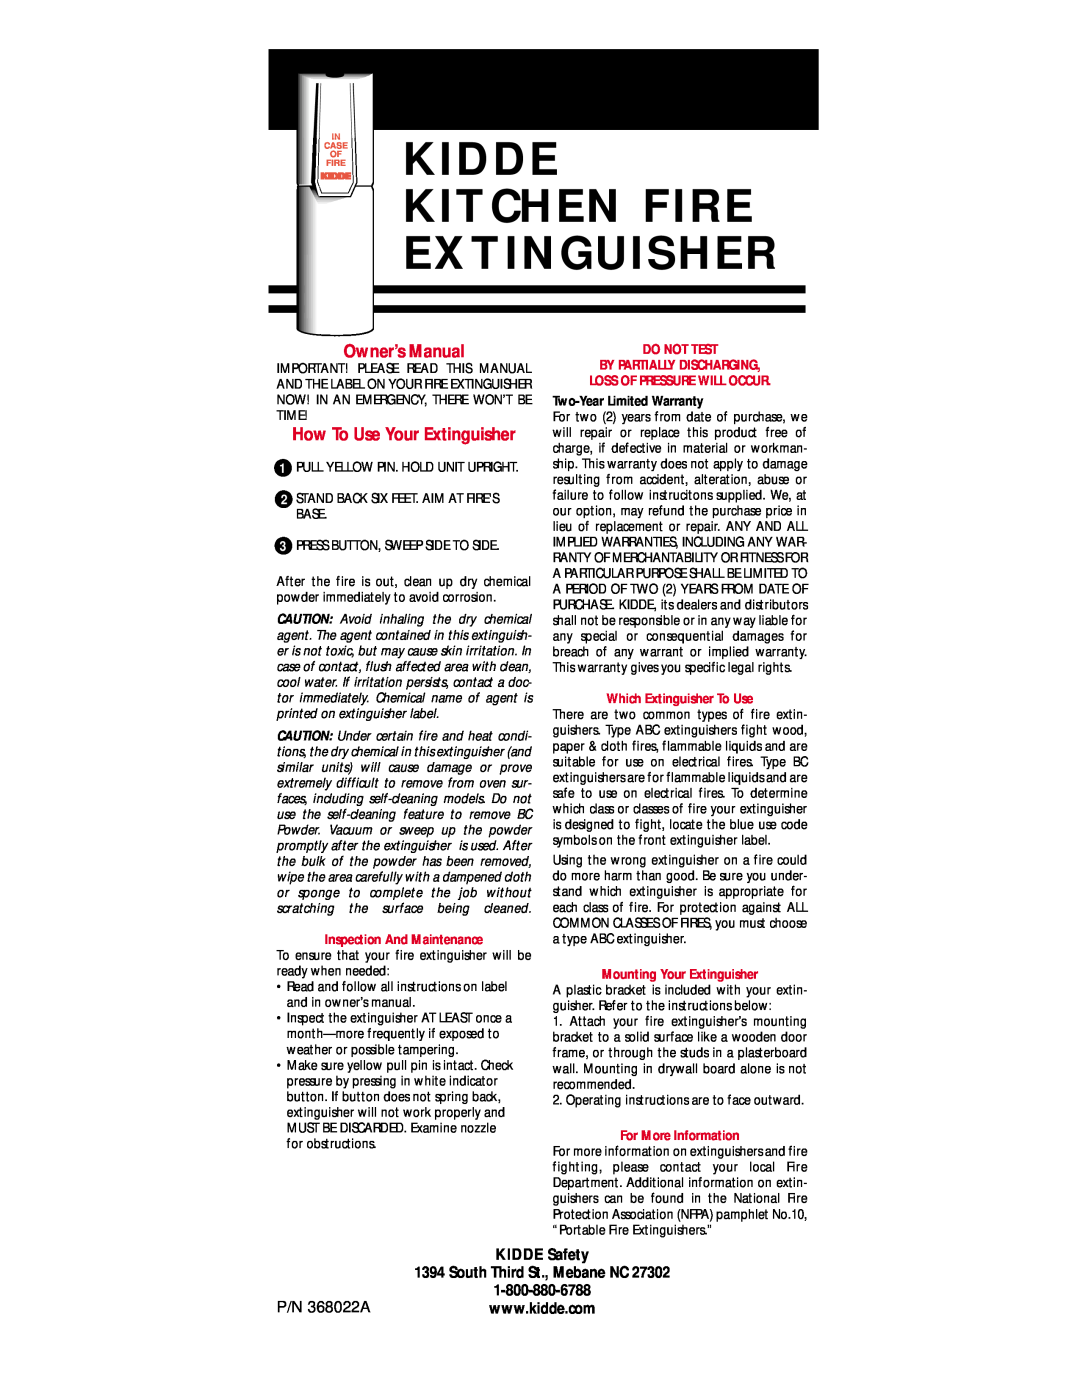 Kidde KITCHEN FIRE EXTINGUISHER owner manual Kidde Kitchen Fire Extinguisher, Owner’s Manual, How To Use Your Extinguisher 